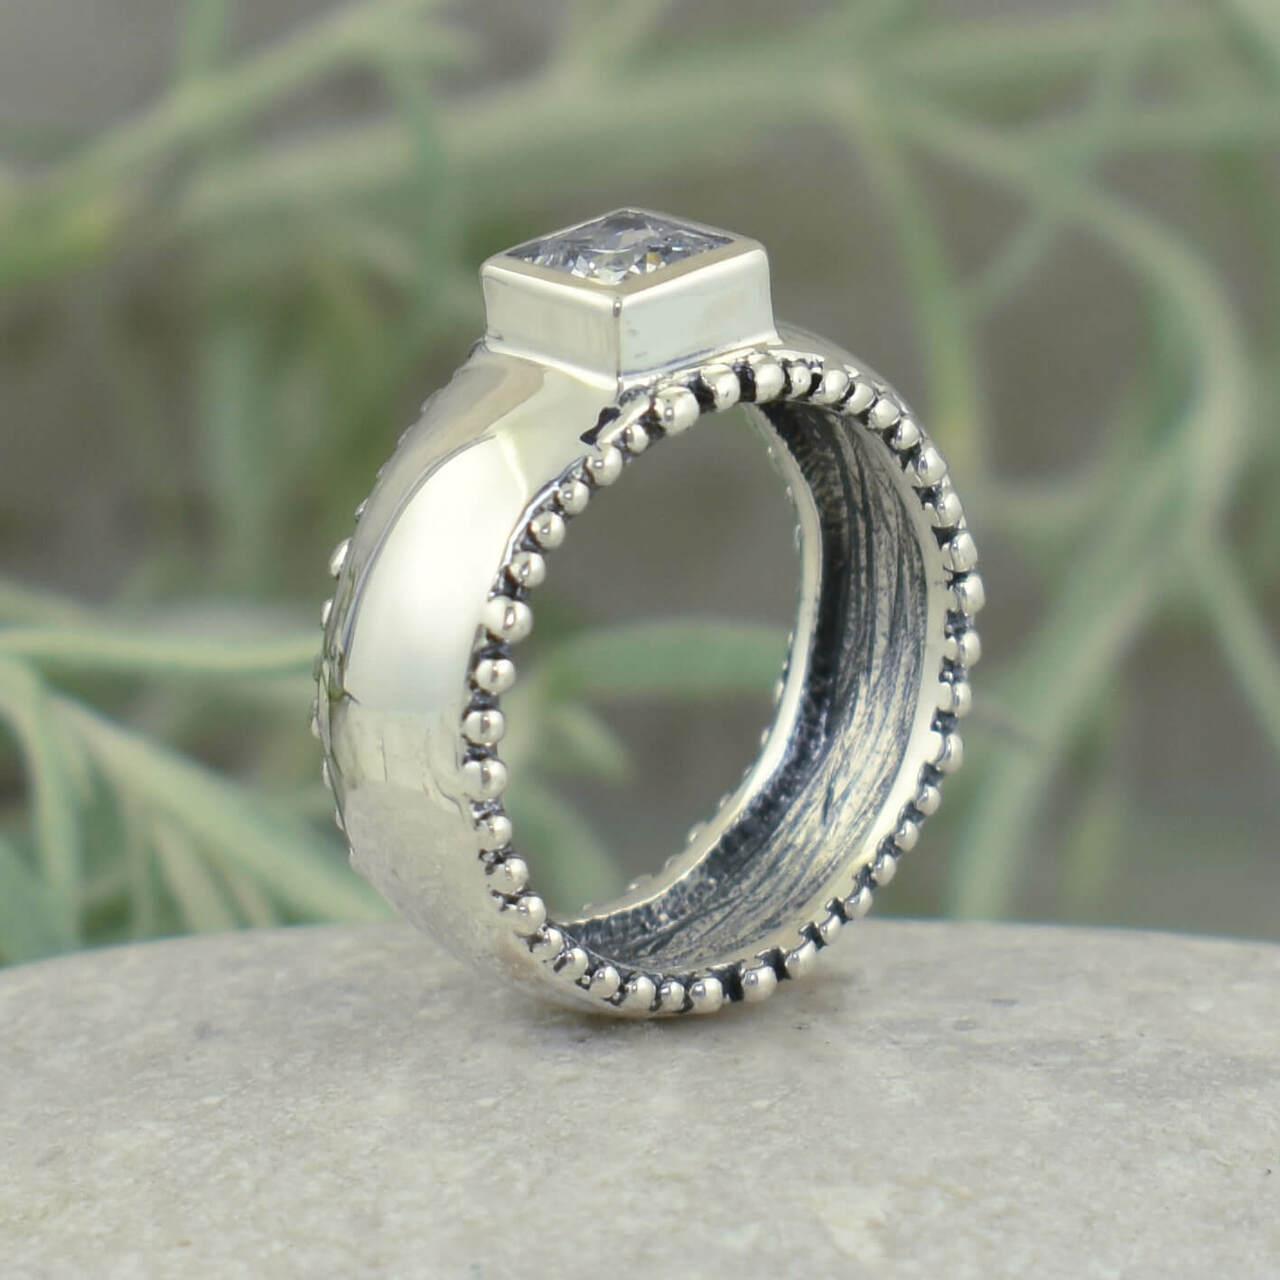 Handcrafted sterling silver ring with square cubic zirconia stone